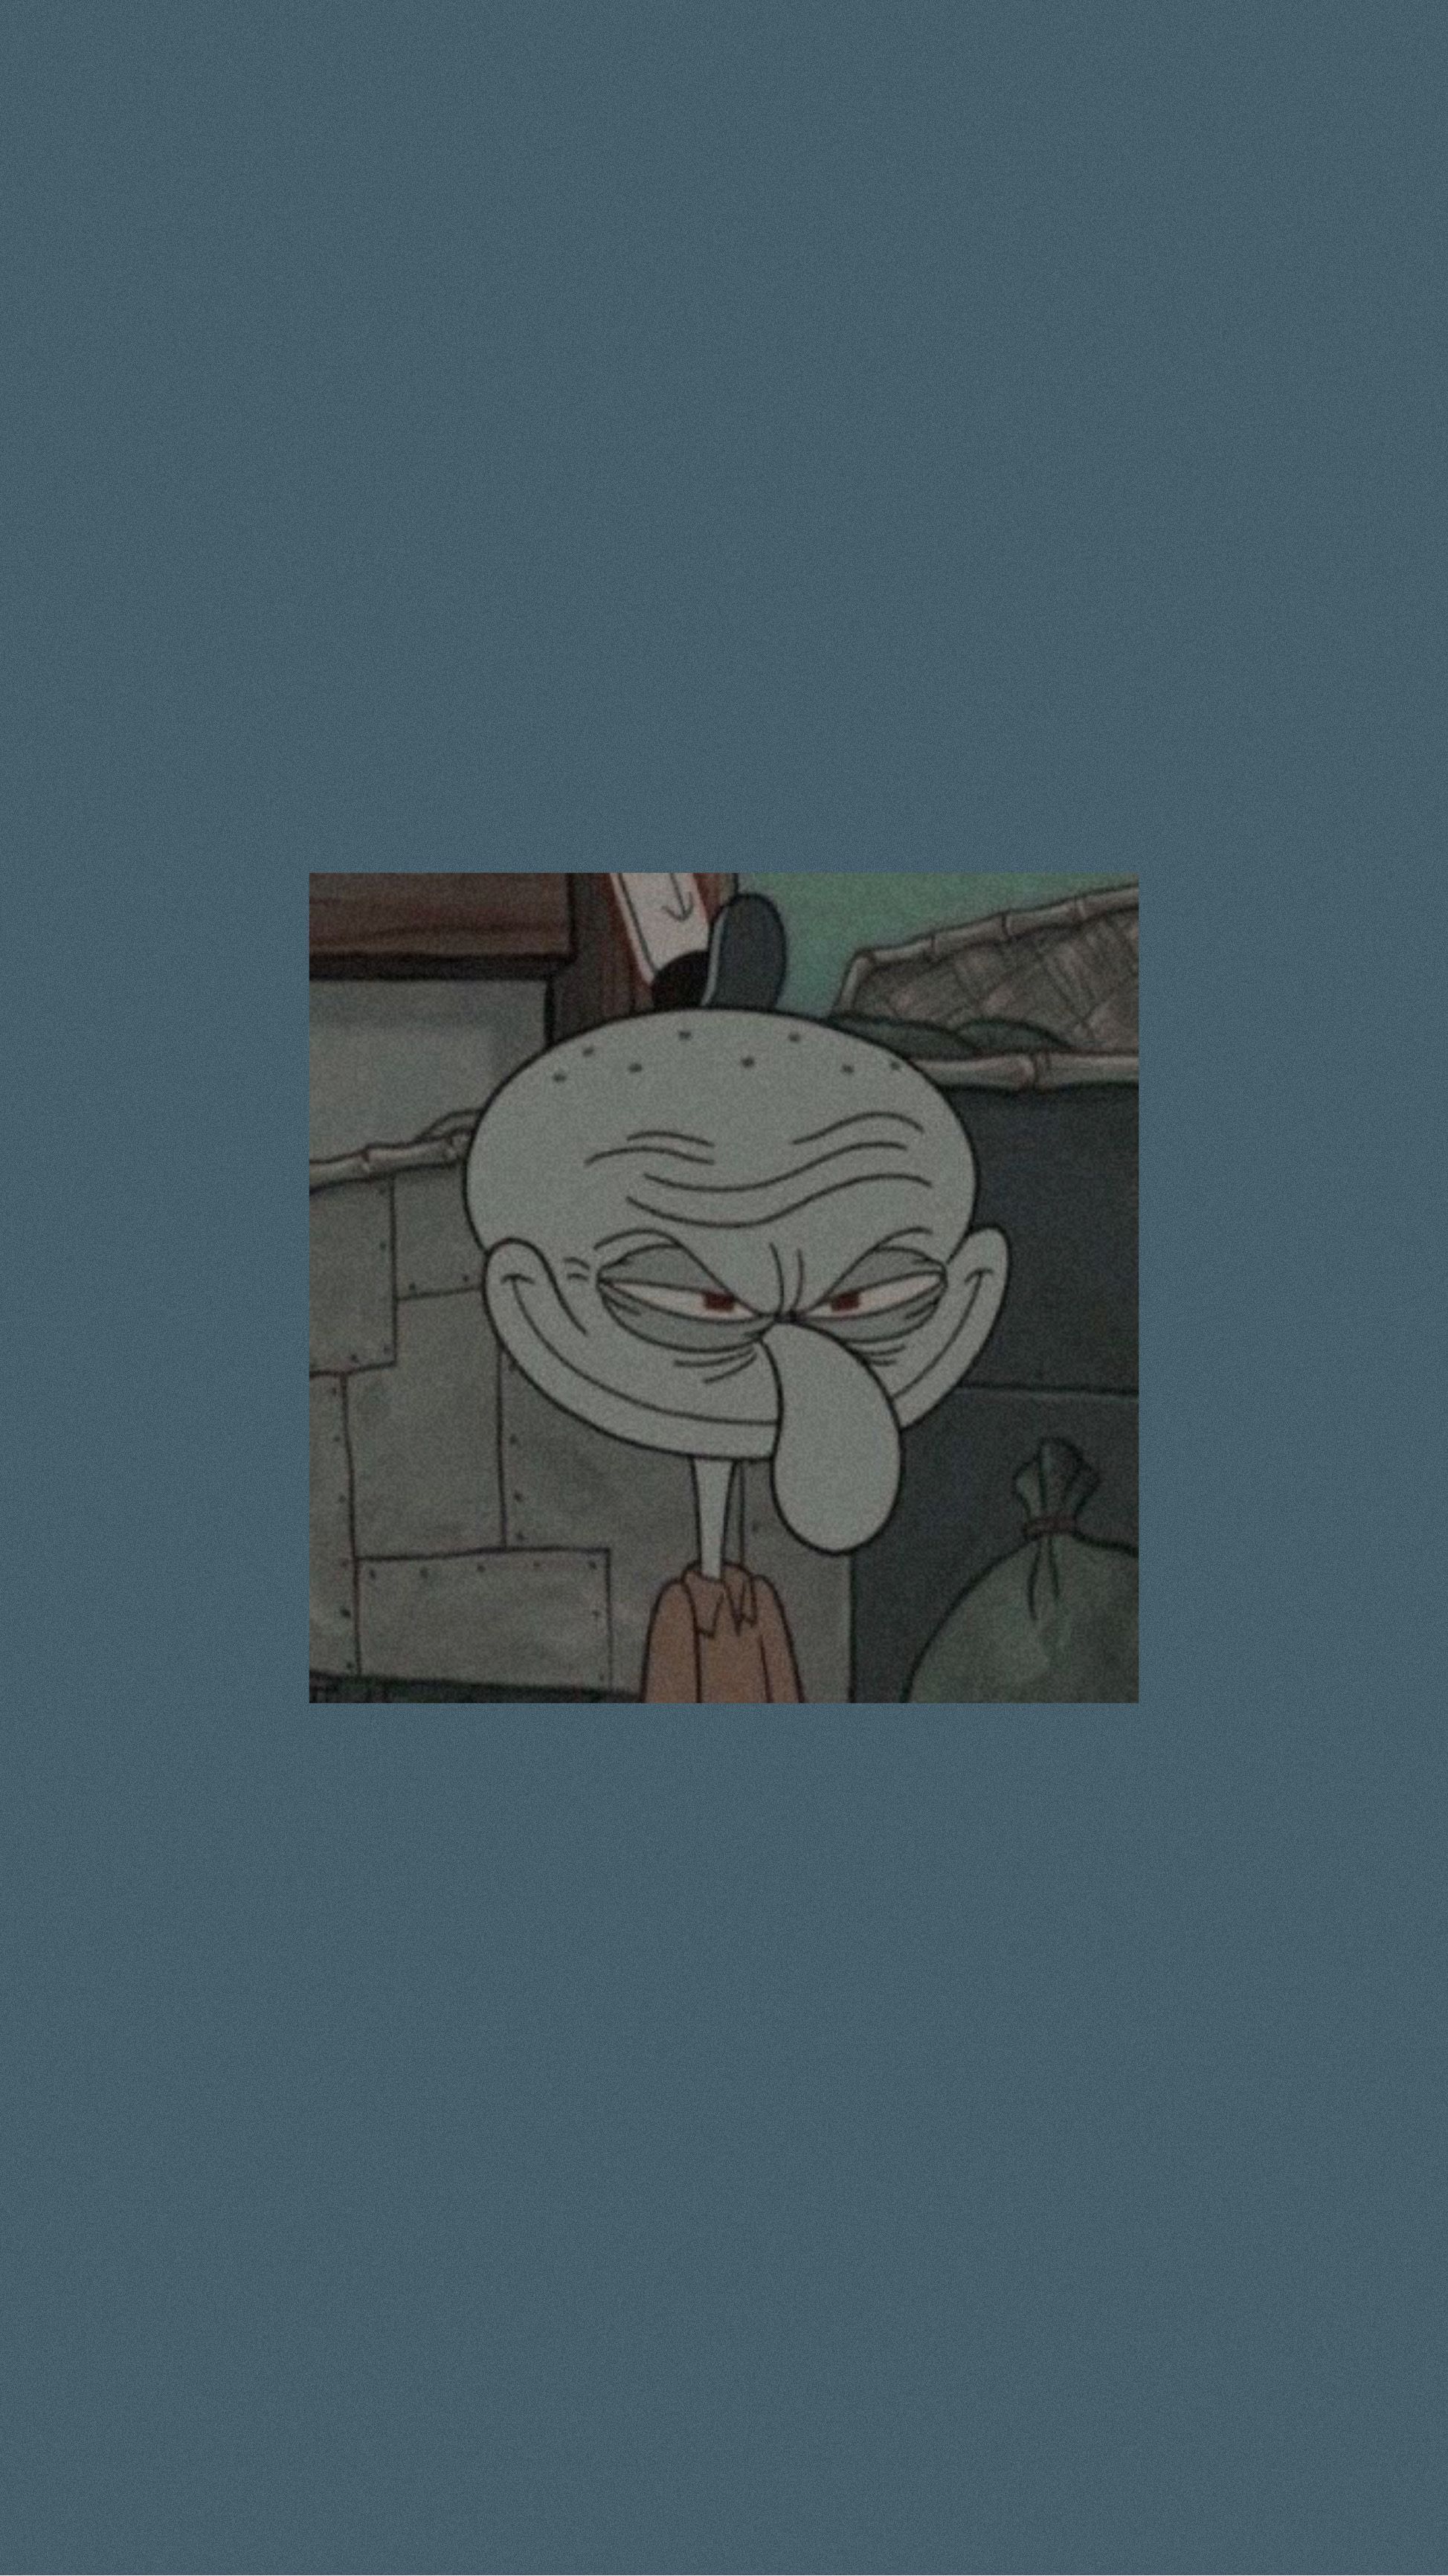 A cartoon character with an angry face - Squidward